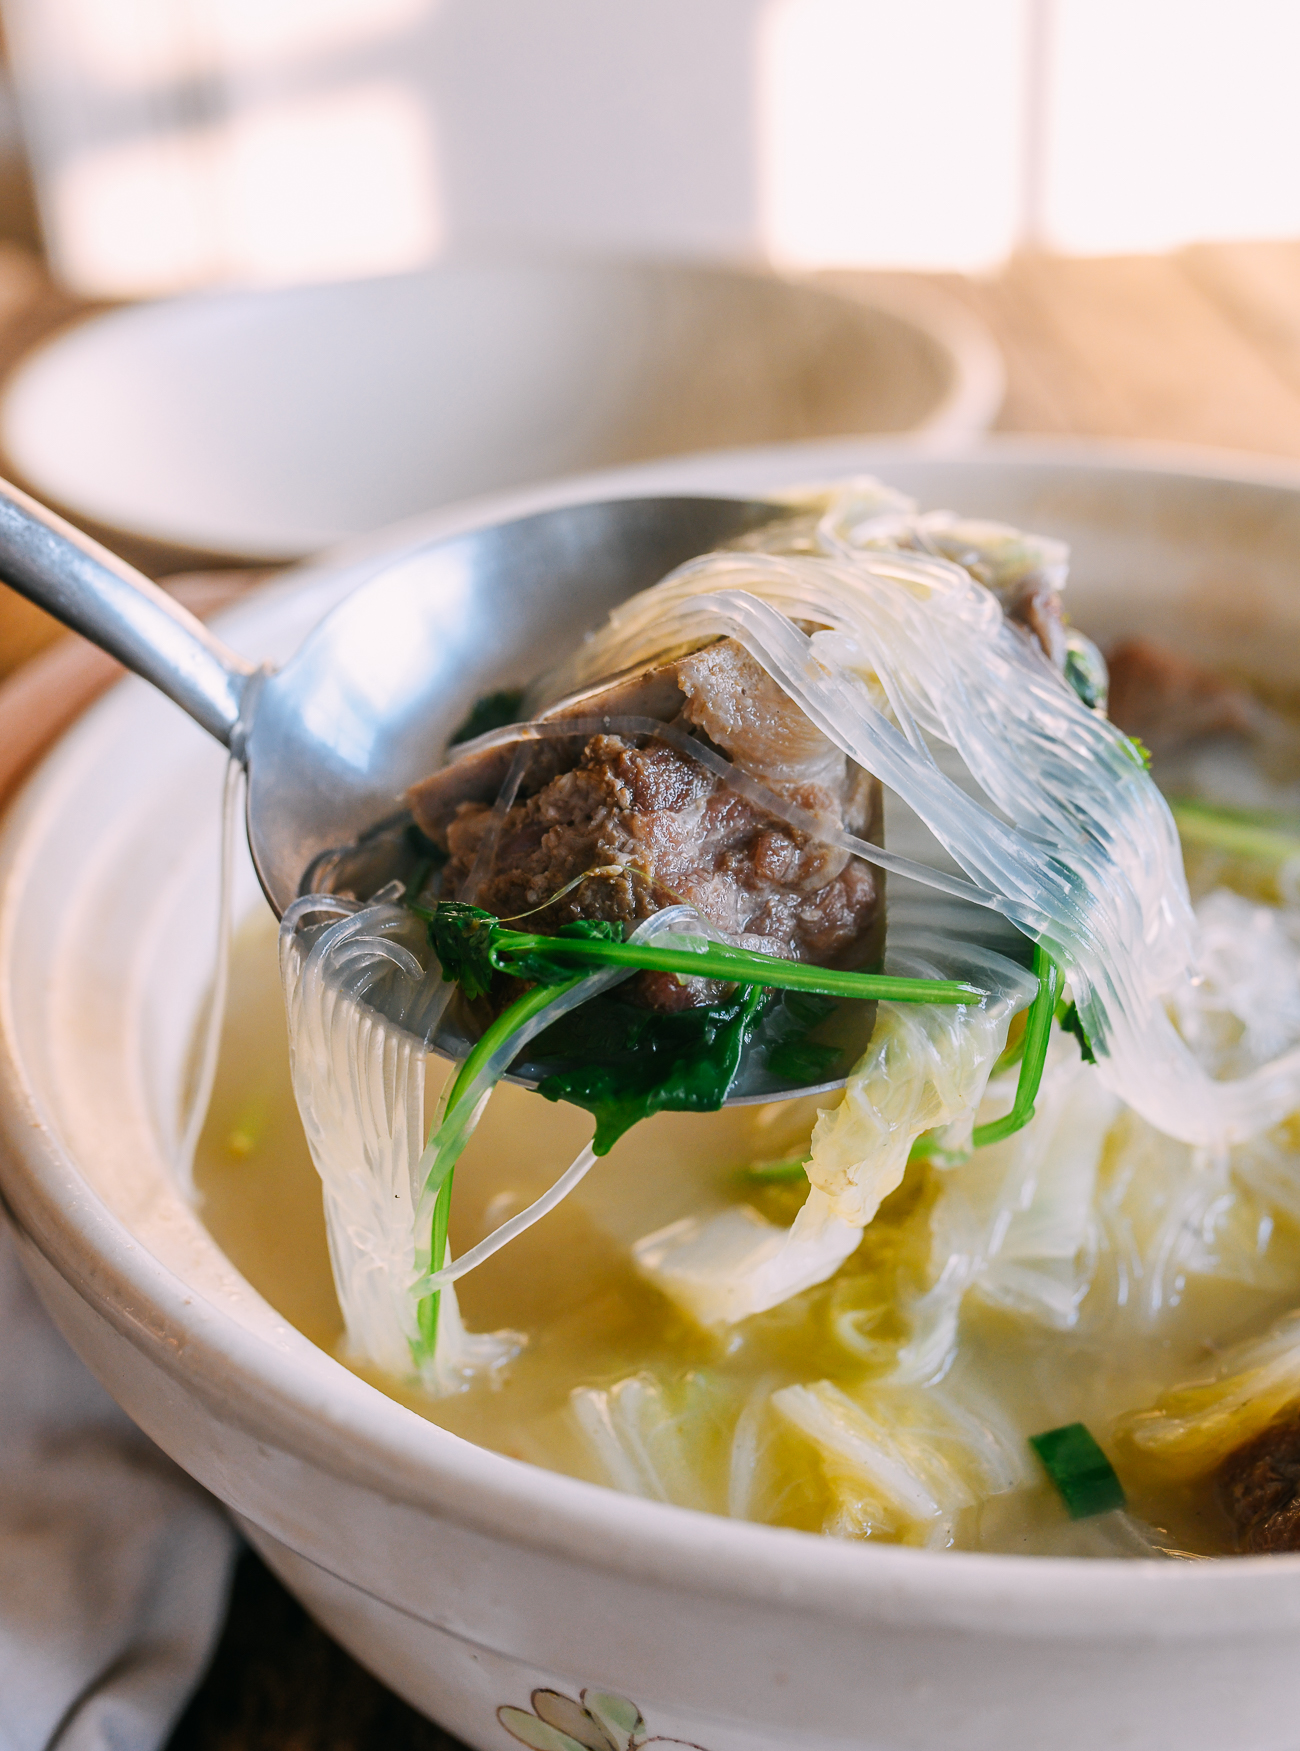 Chinese Salted Pork Bone Soup with Glass Noodles and Napa Cabbage